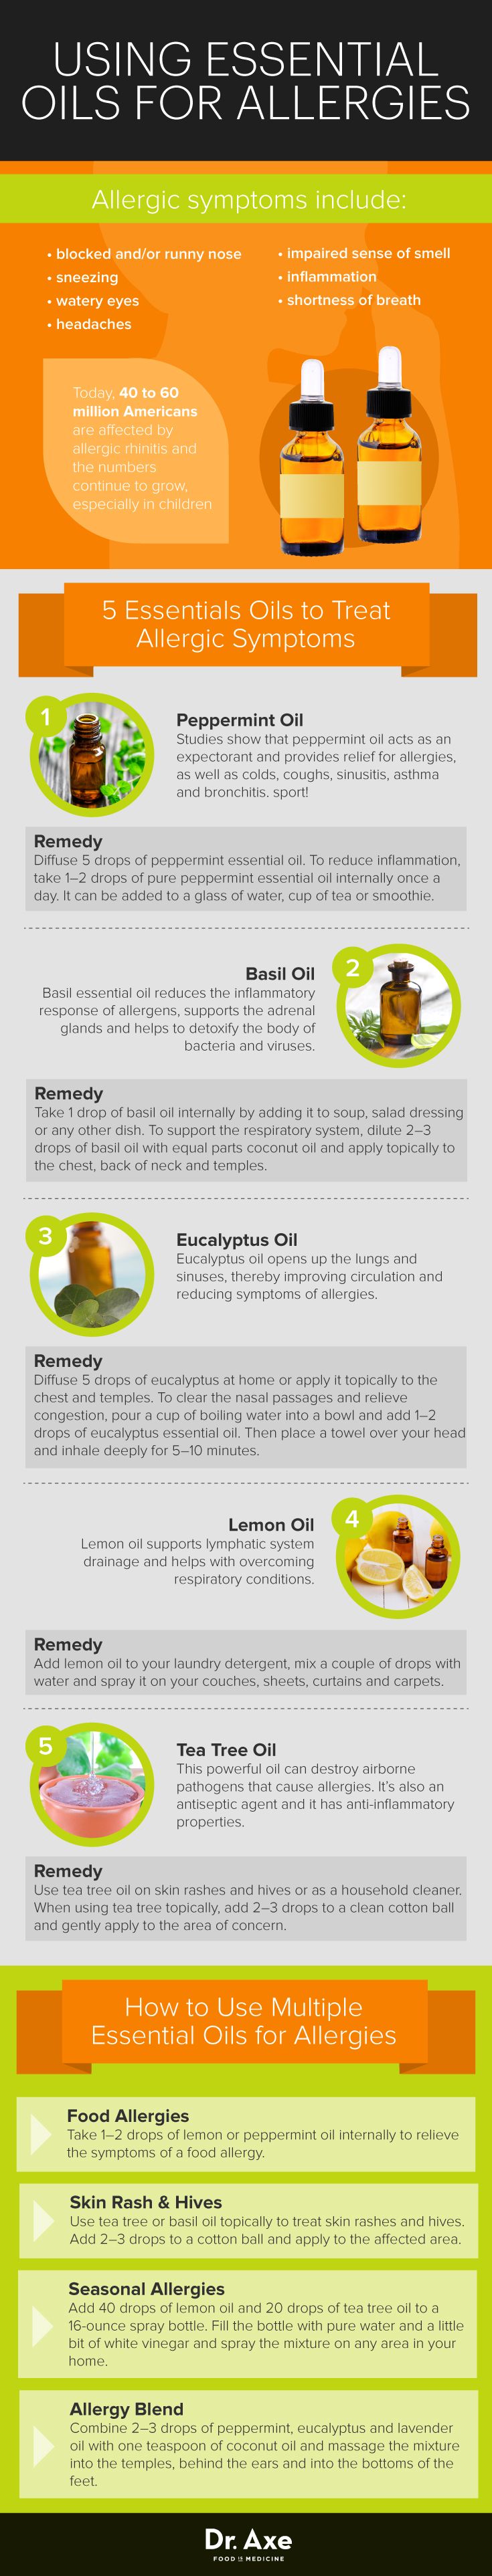 Best Essential Oils For Treating Allergies Infographic